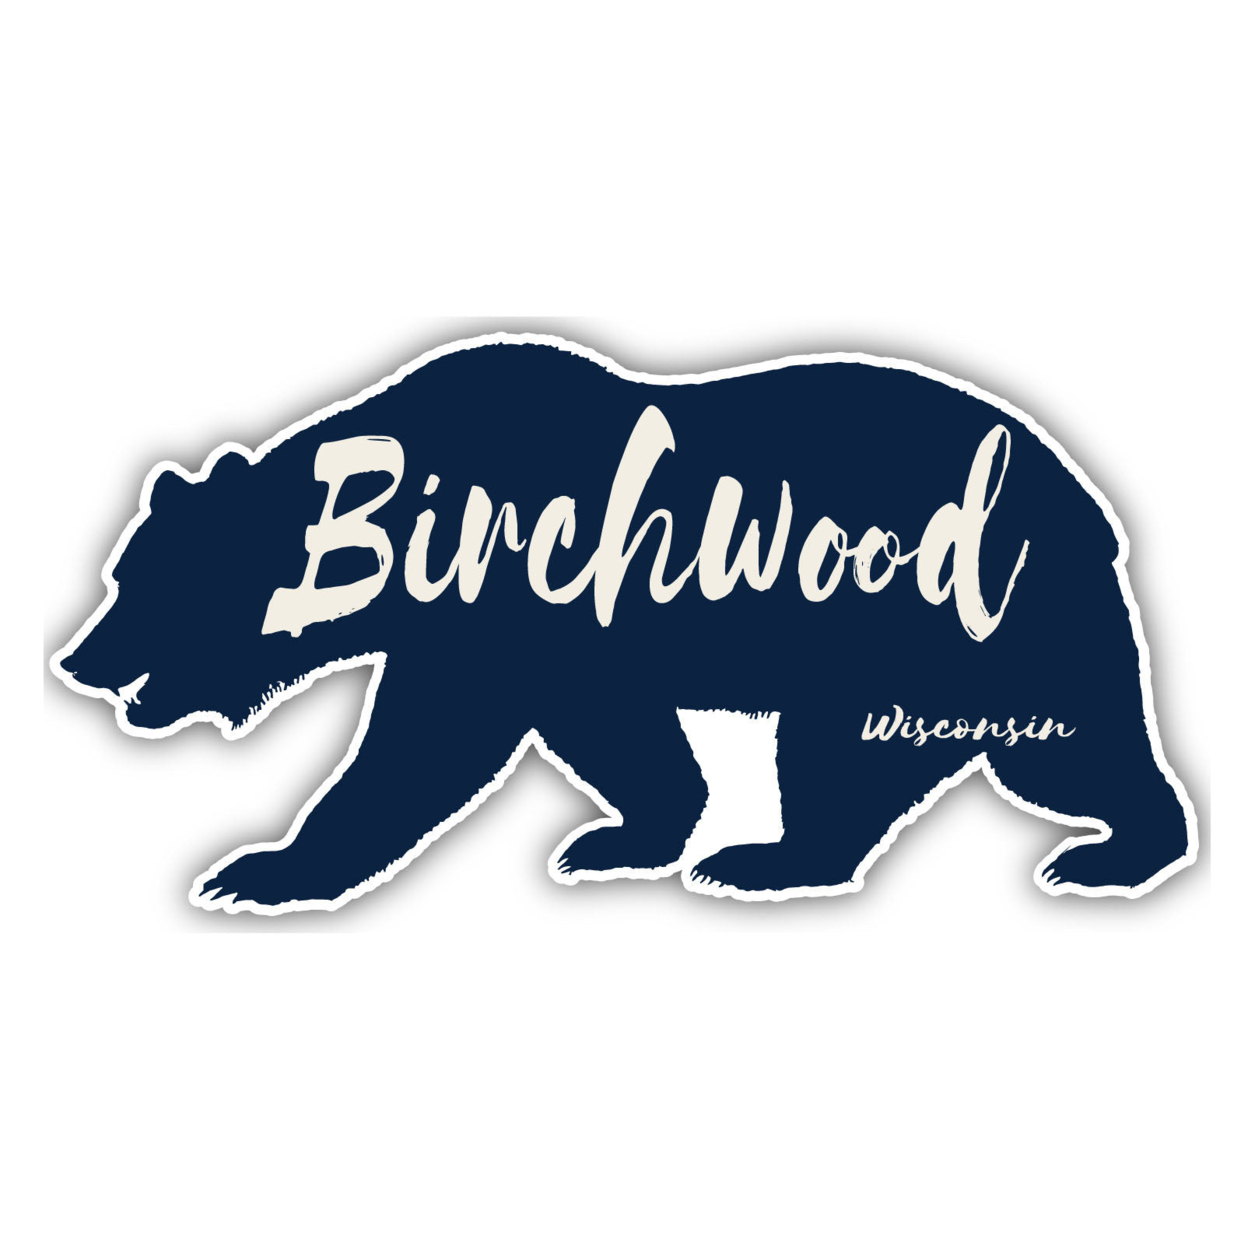 Birchwood Wisconsin Souvenir Decorative Stickers (Choose Theme And Size) - 4-Pack, 4-Inch, Bear